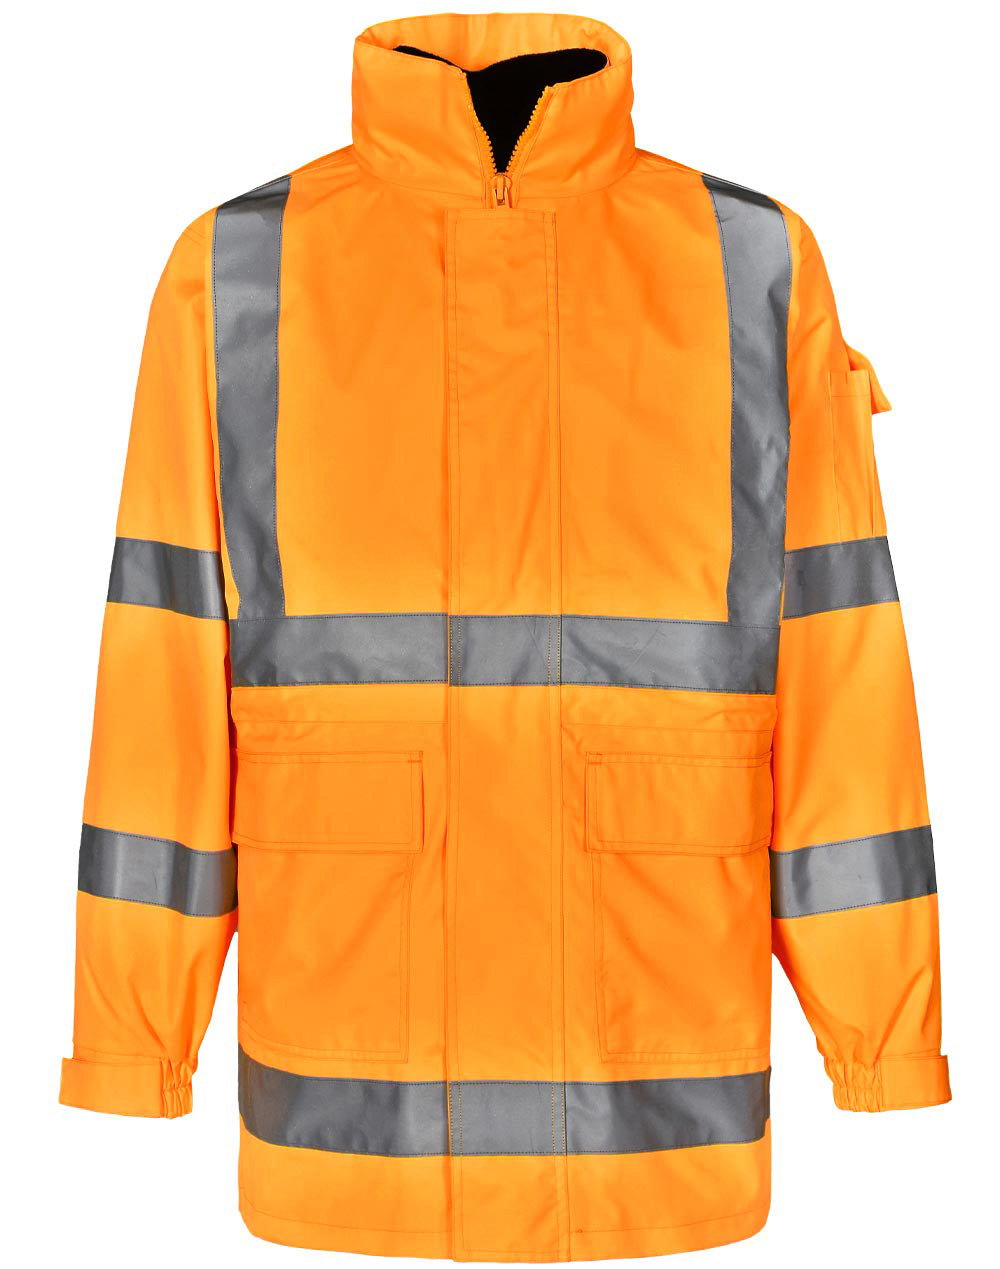 [SW75] Biomotion VIC Rail Safety Jacket